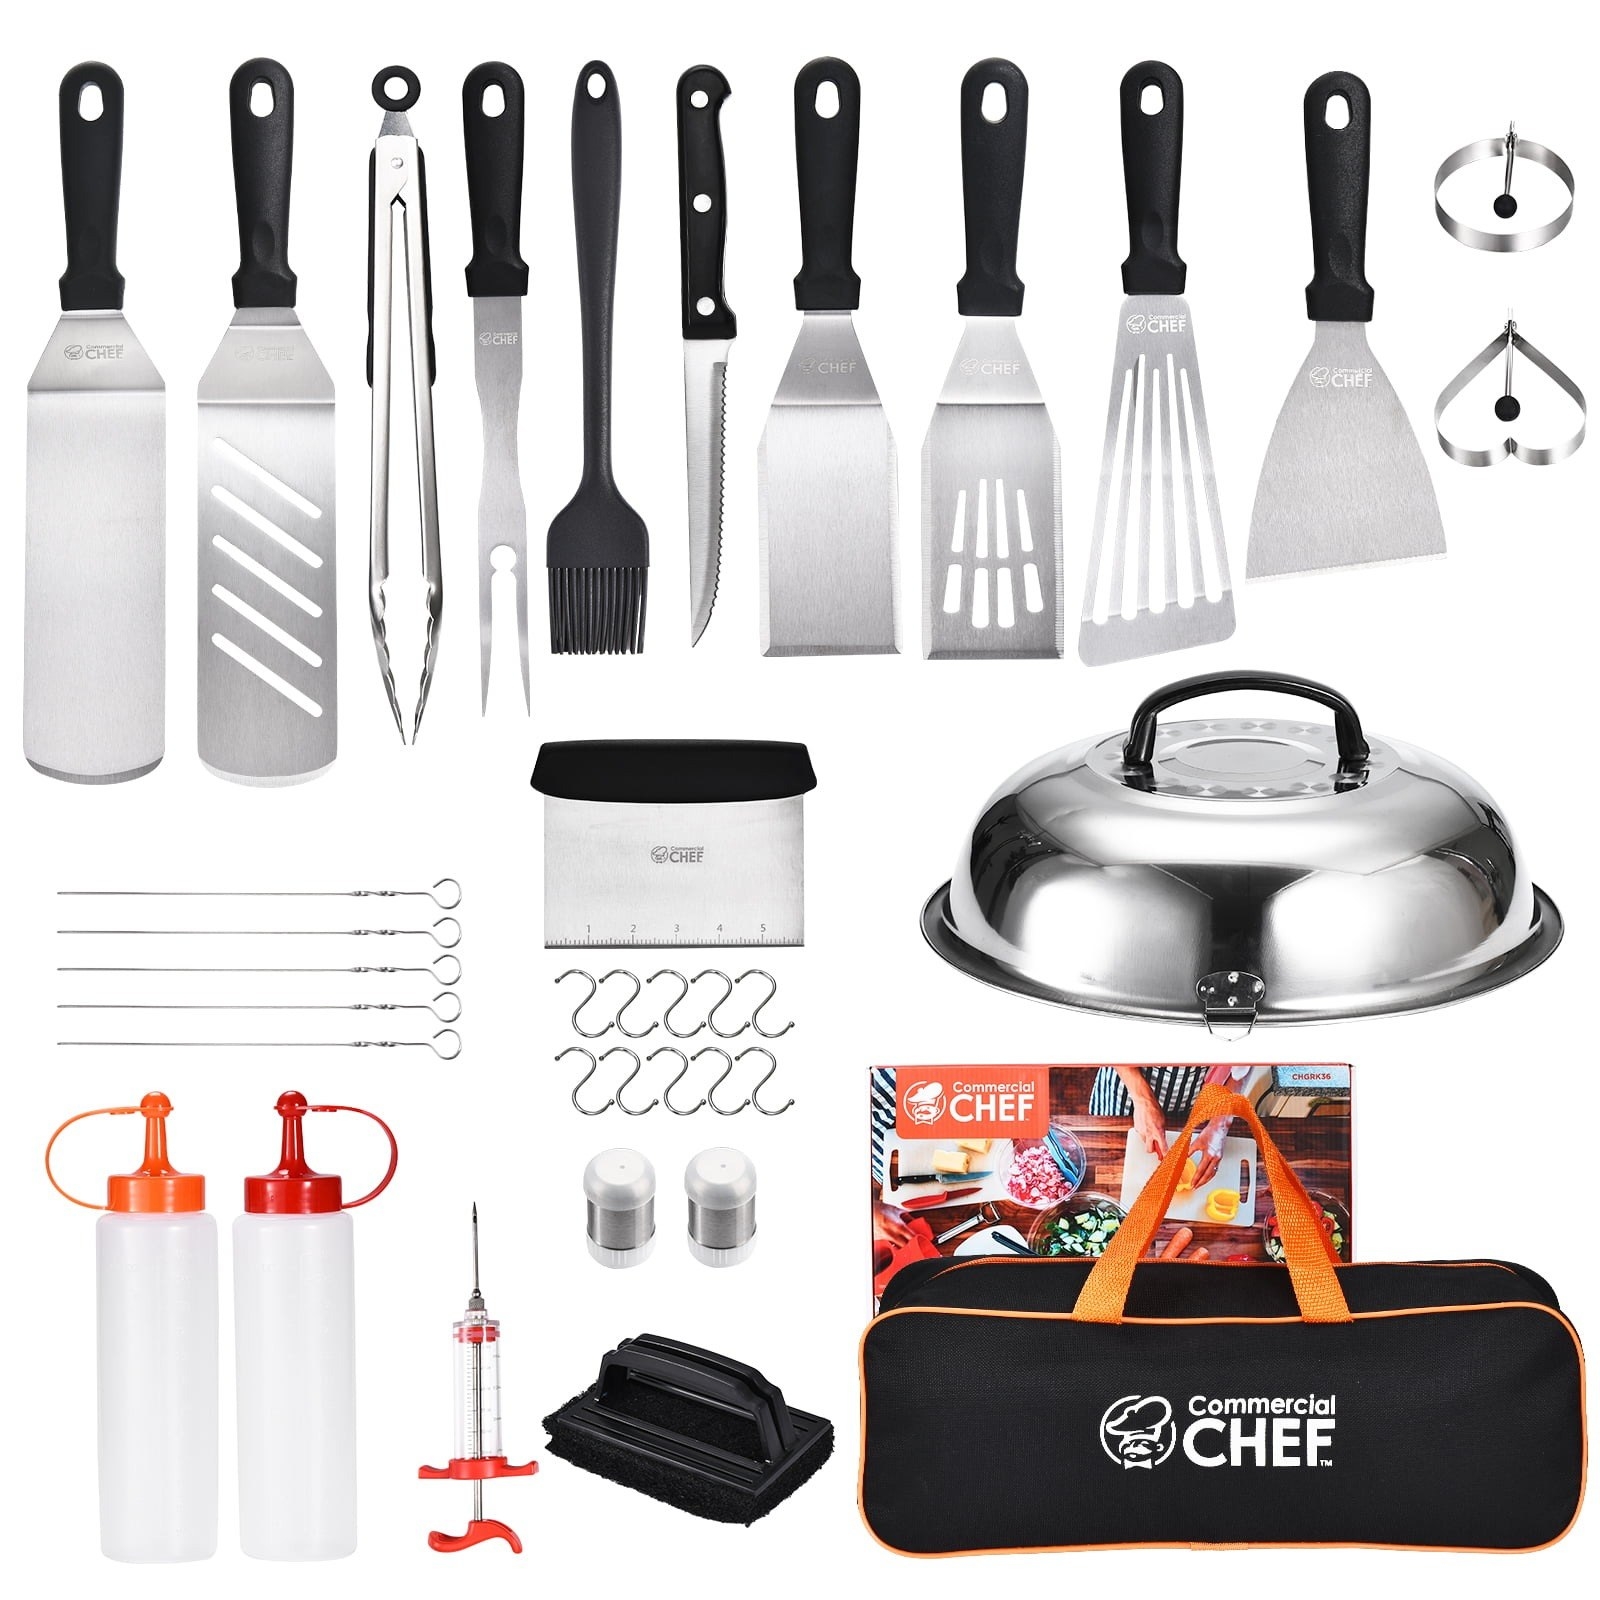 The contents of the 36-piece grill accessory set and black carrying bag at bottom right